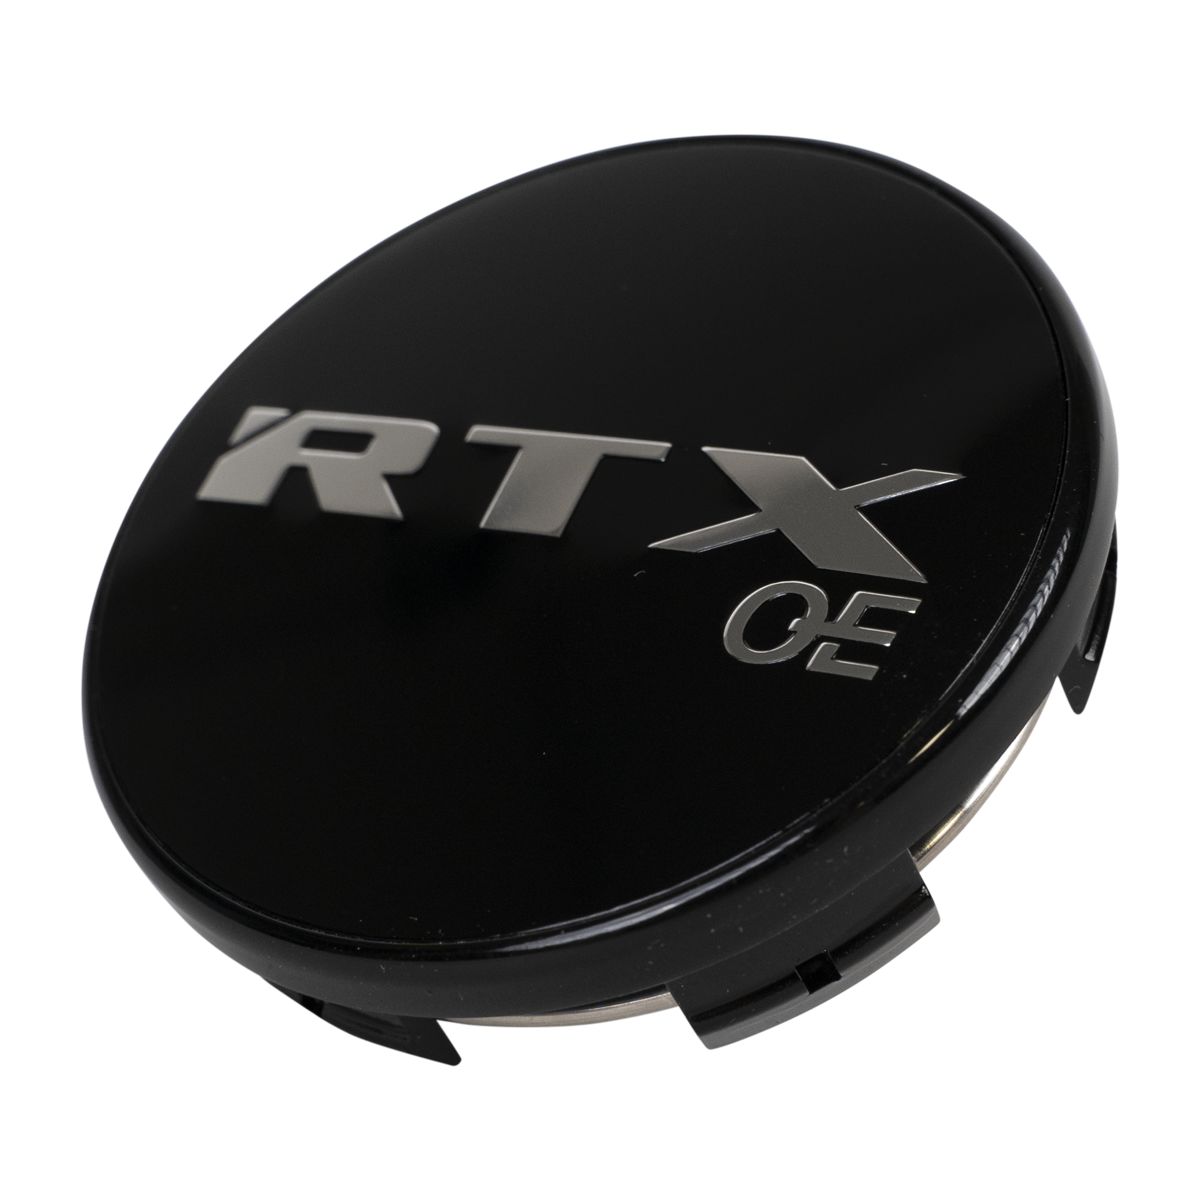 9086K75B1OE - Center Cap Gloss Black with Chrome RTXoe with Black Background